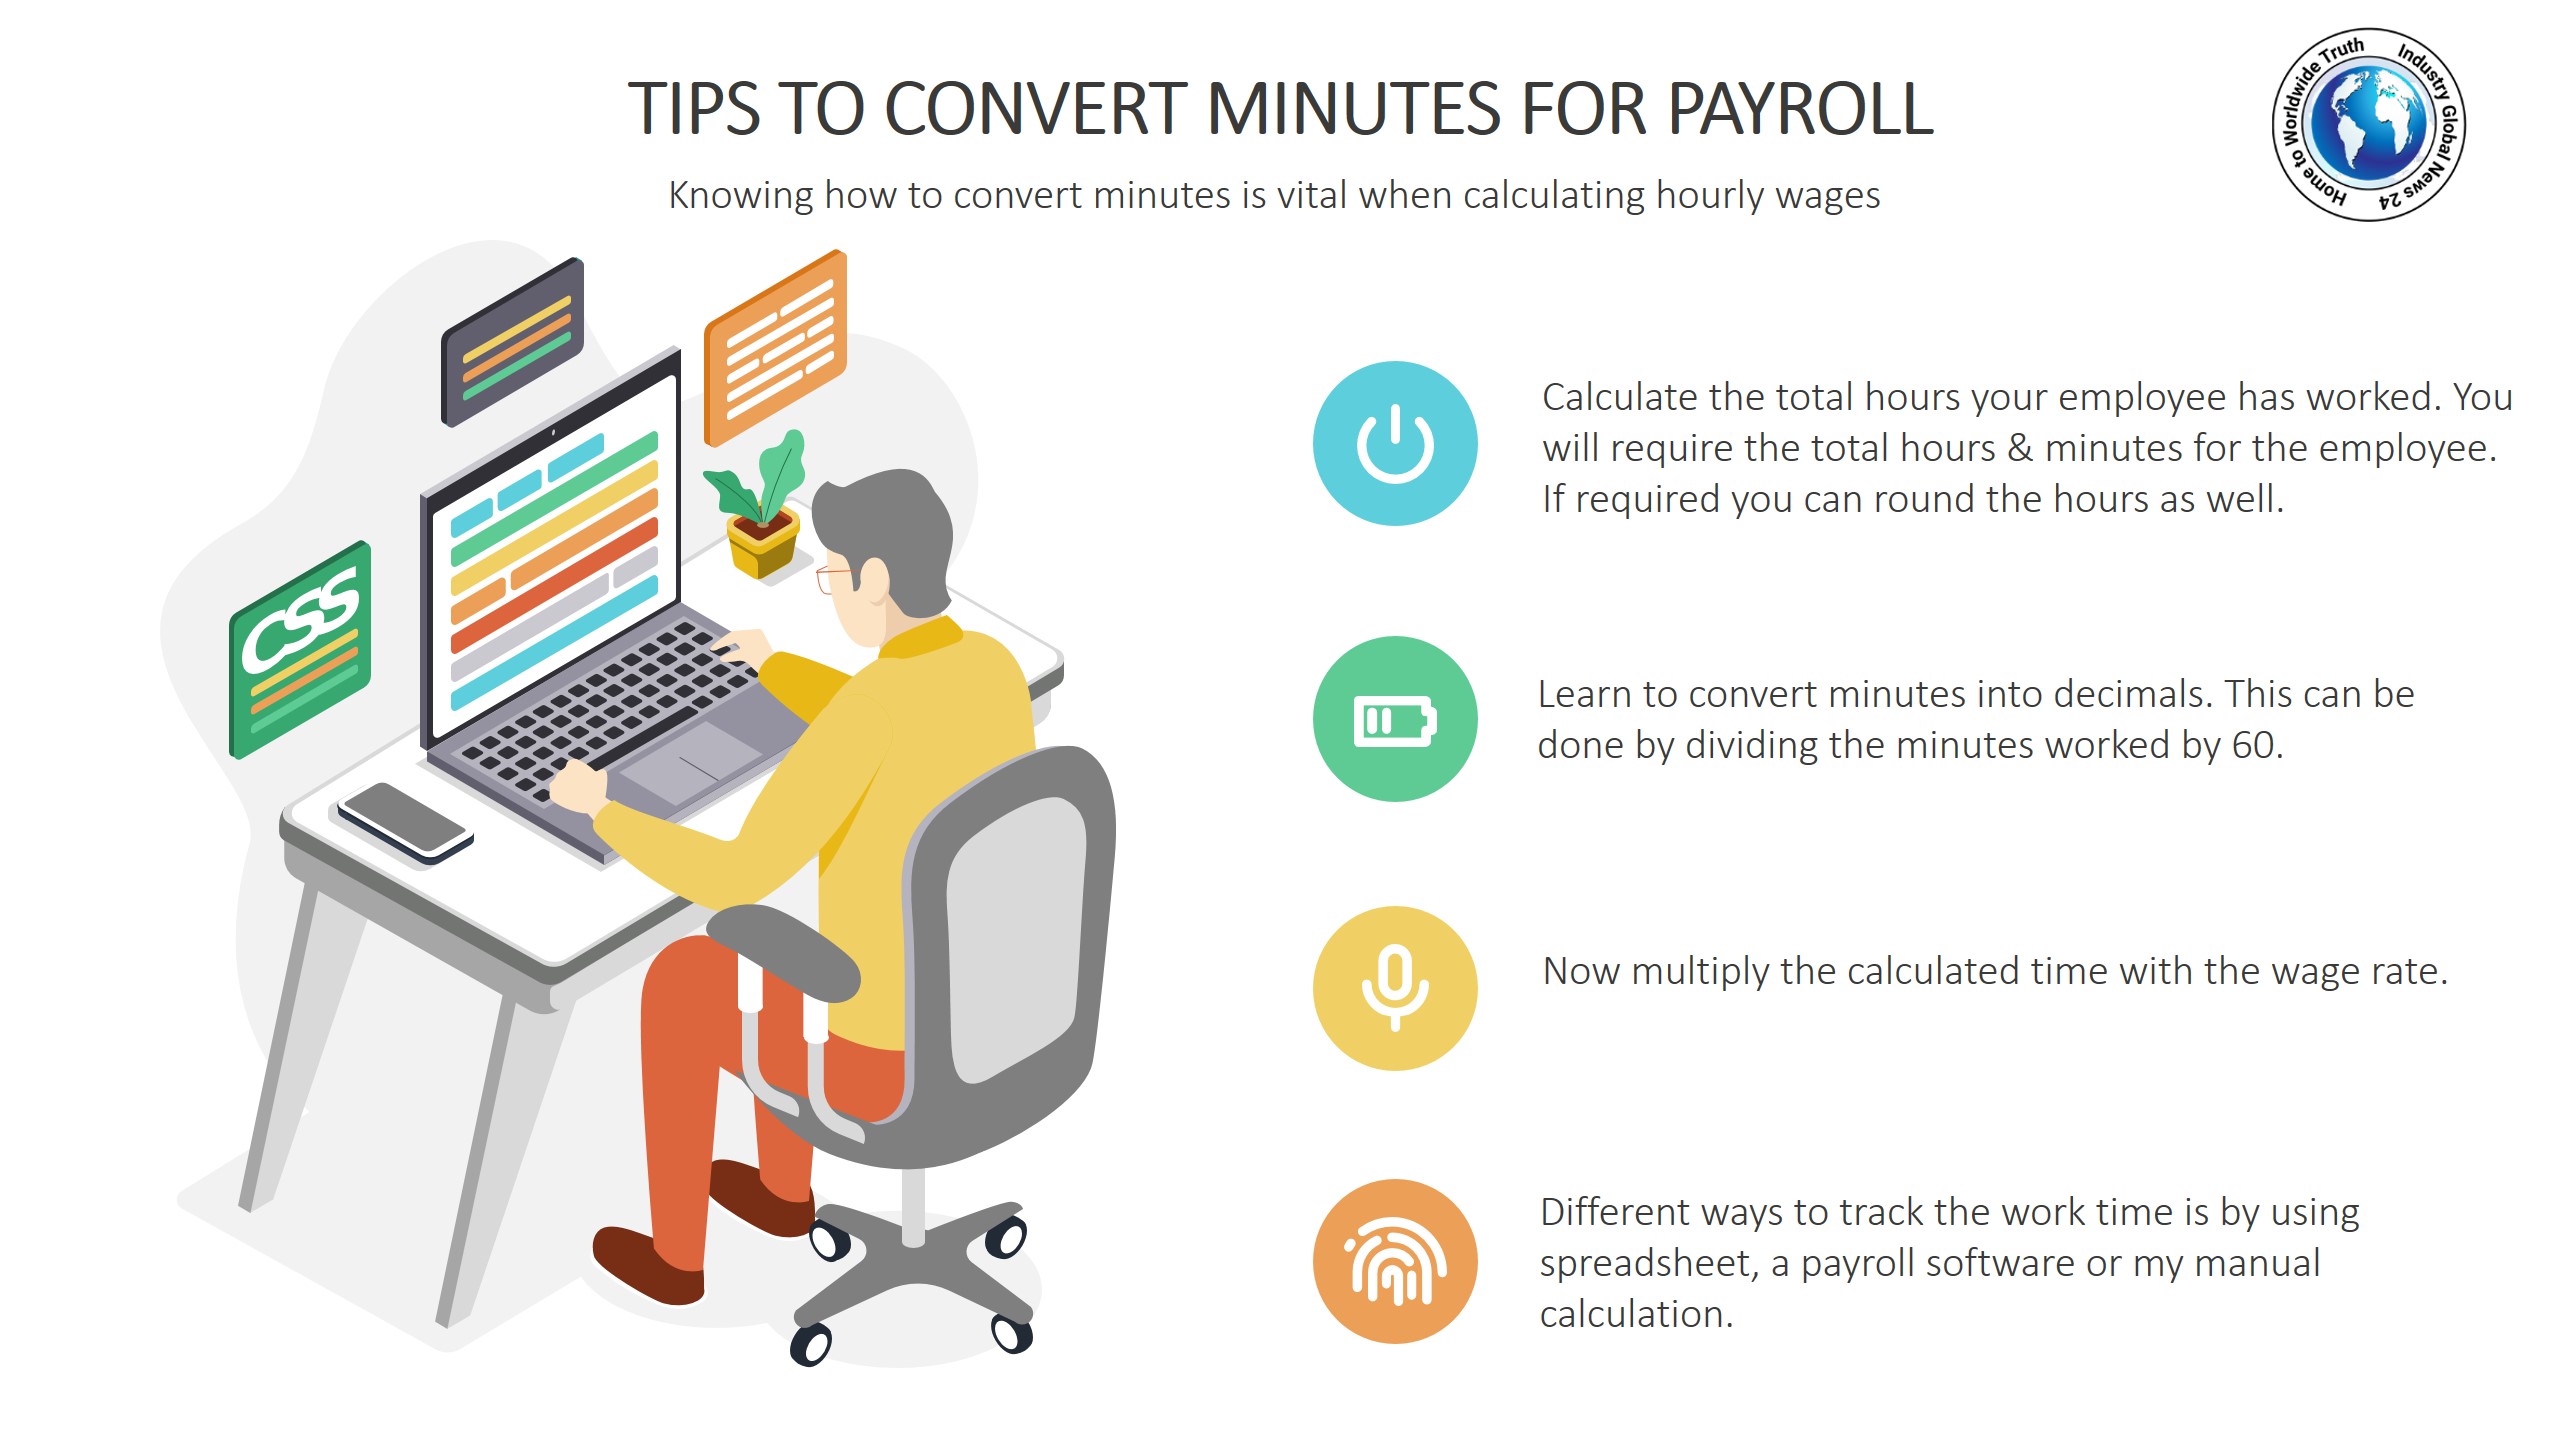 Tips to convert minutes for payroll